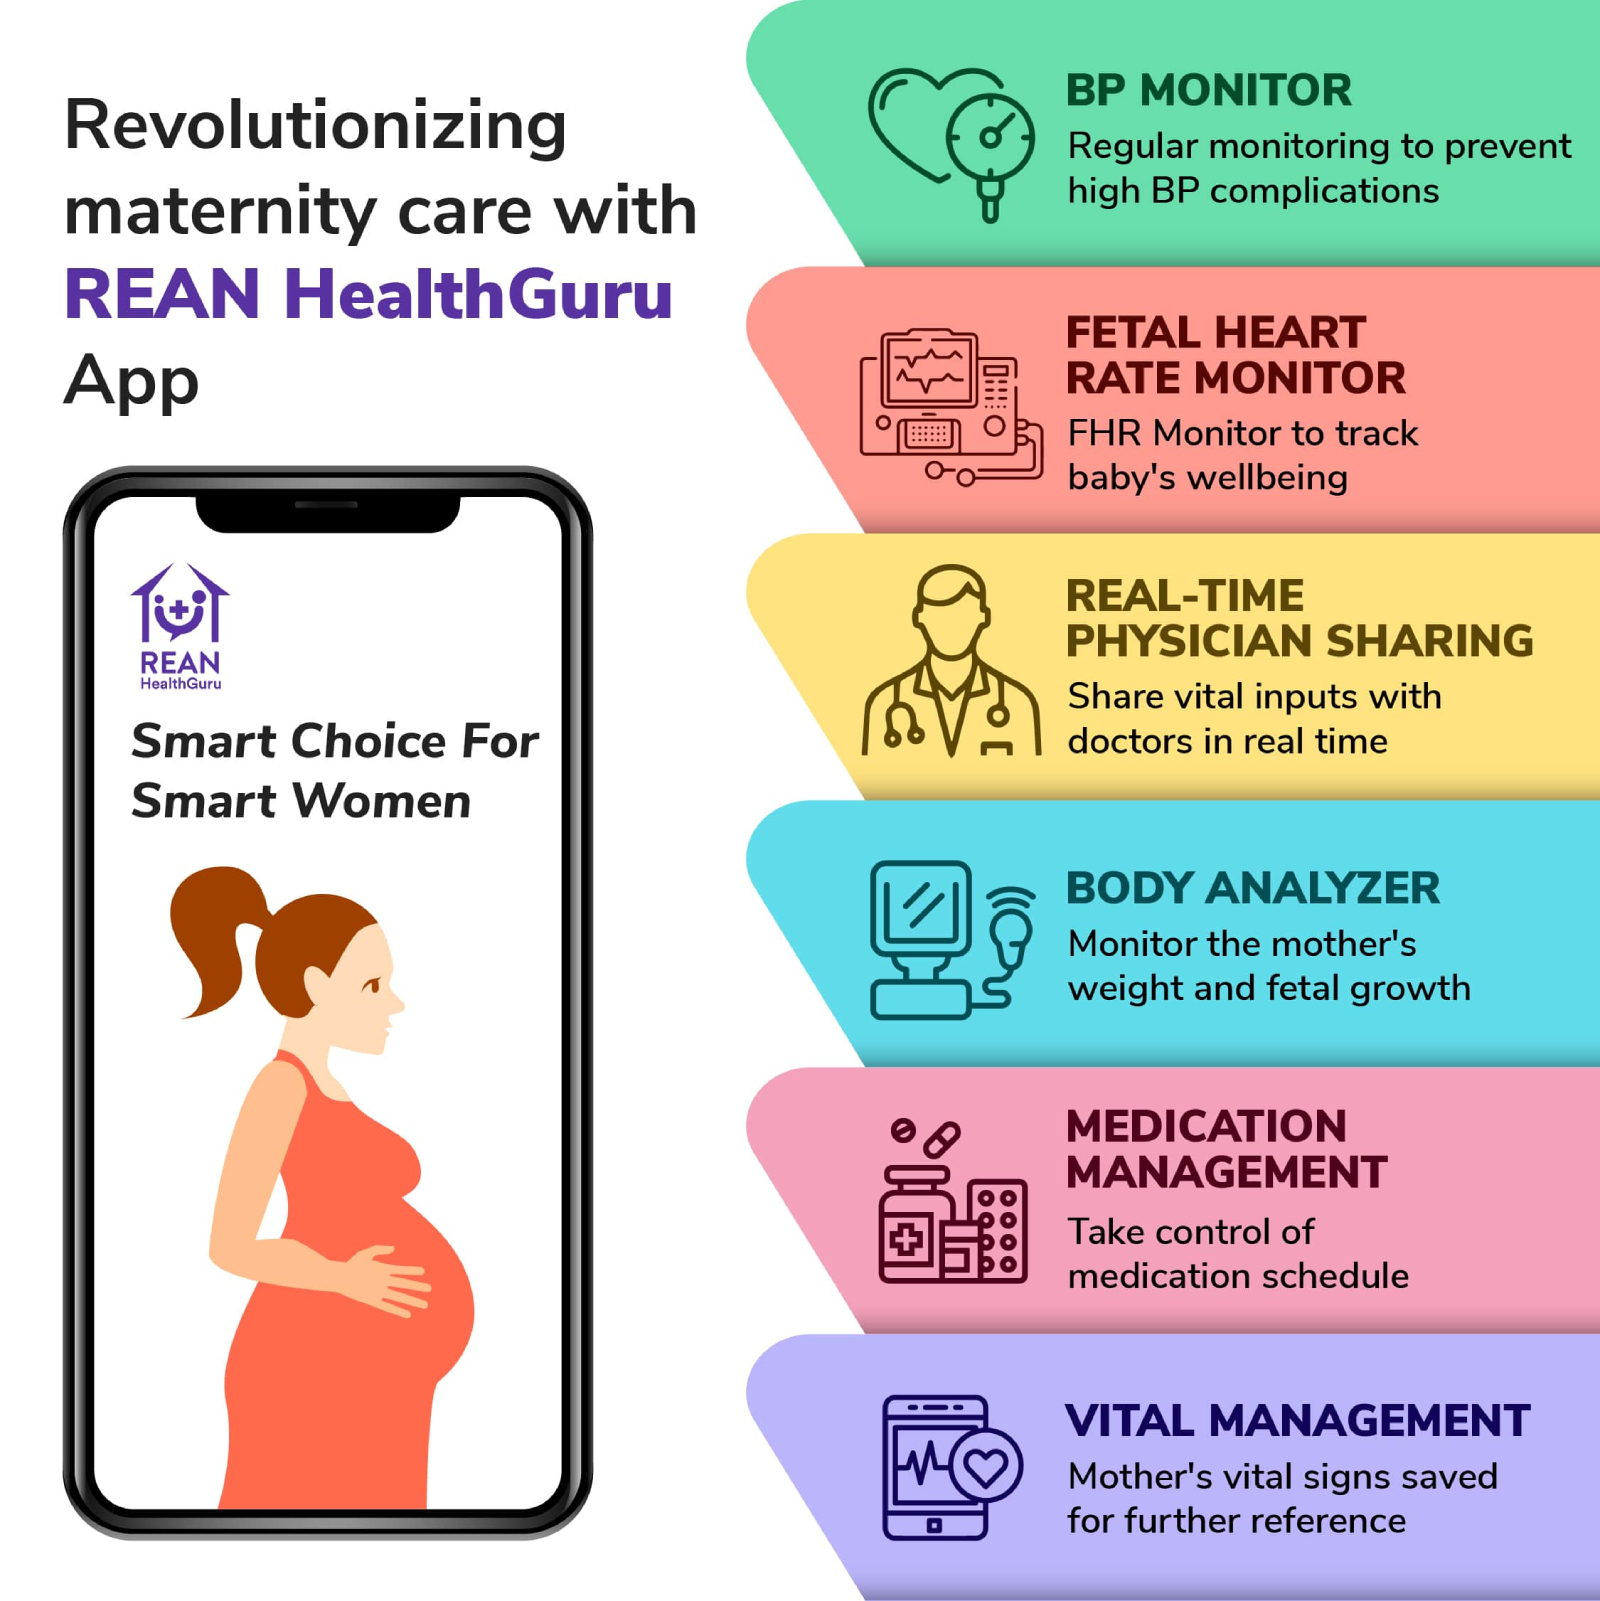 An illustration of some of the features of the REAN HealthGuru application for maternity care.